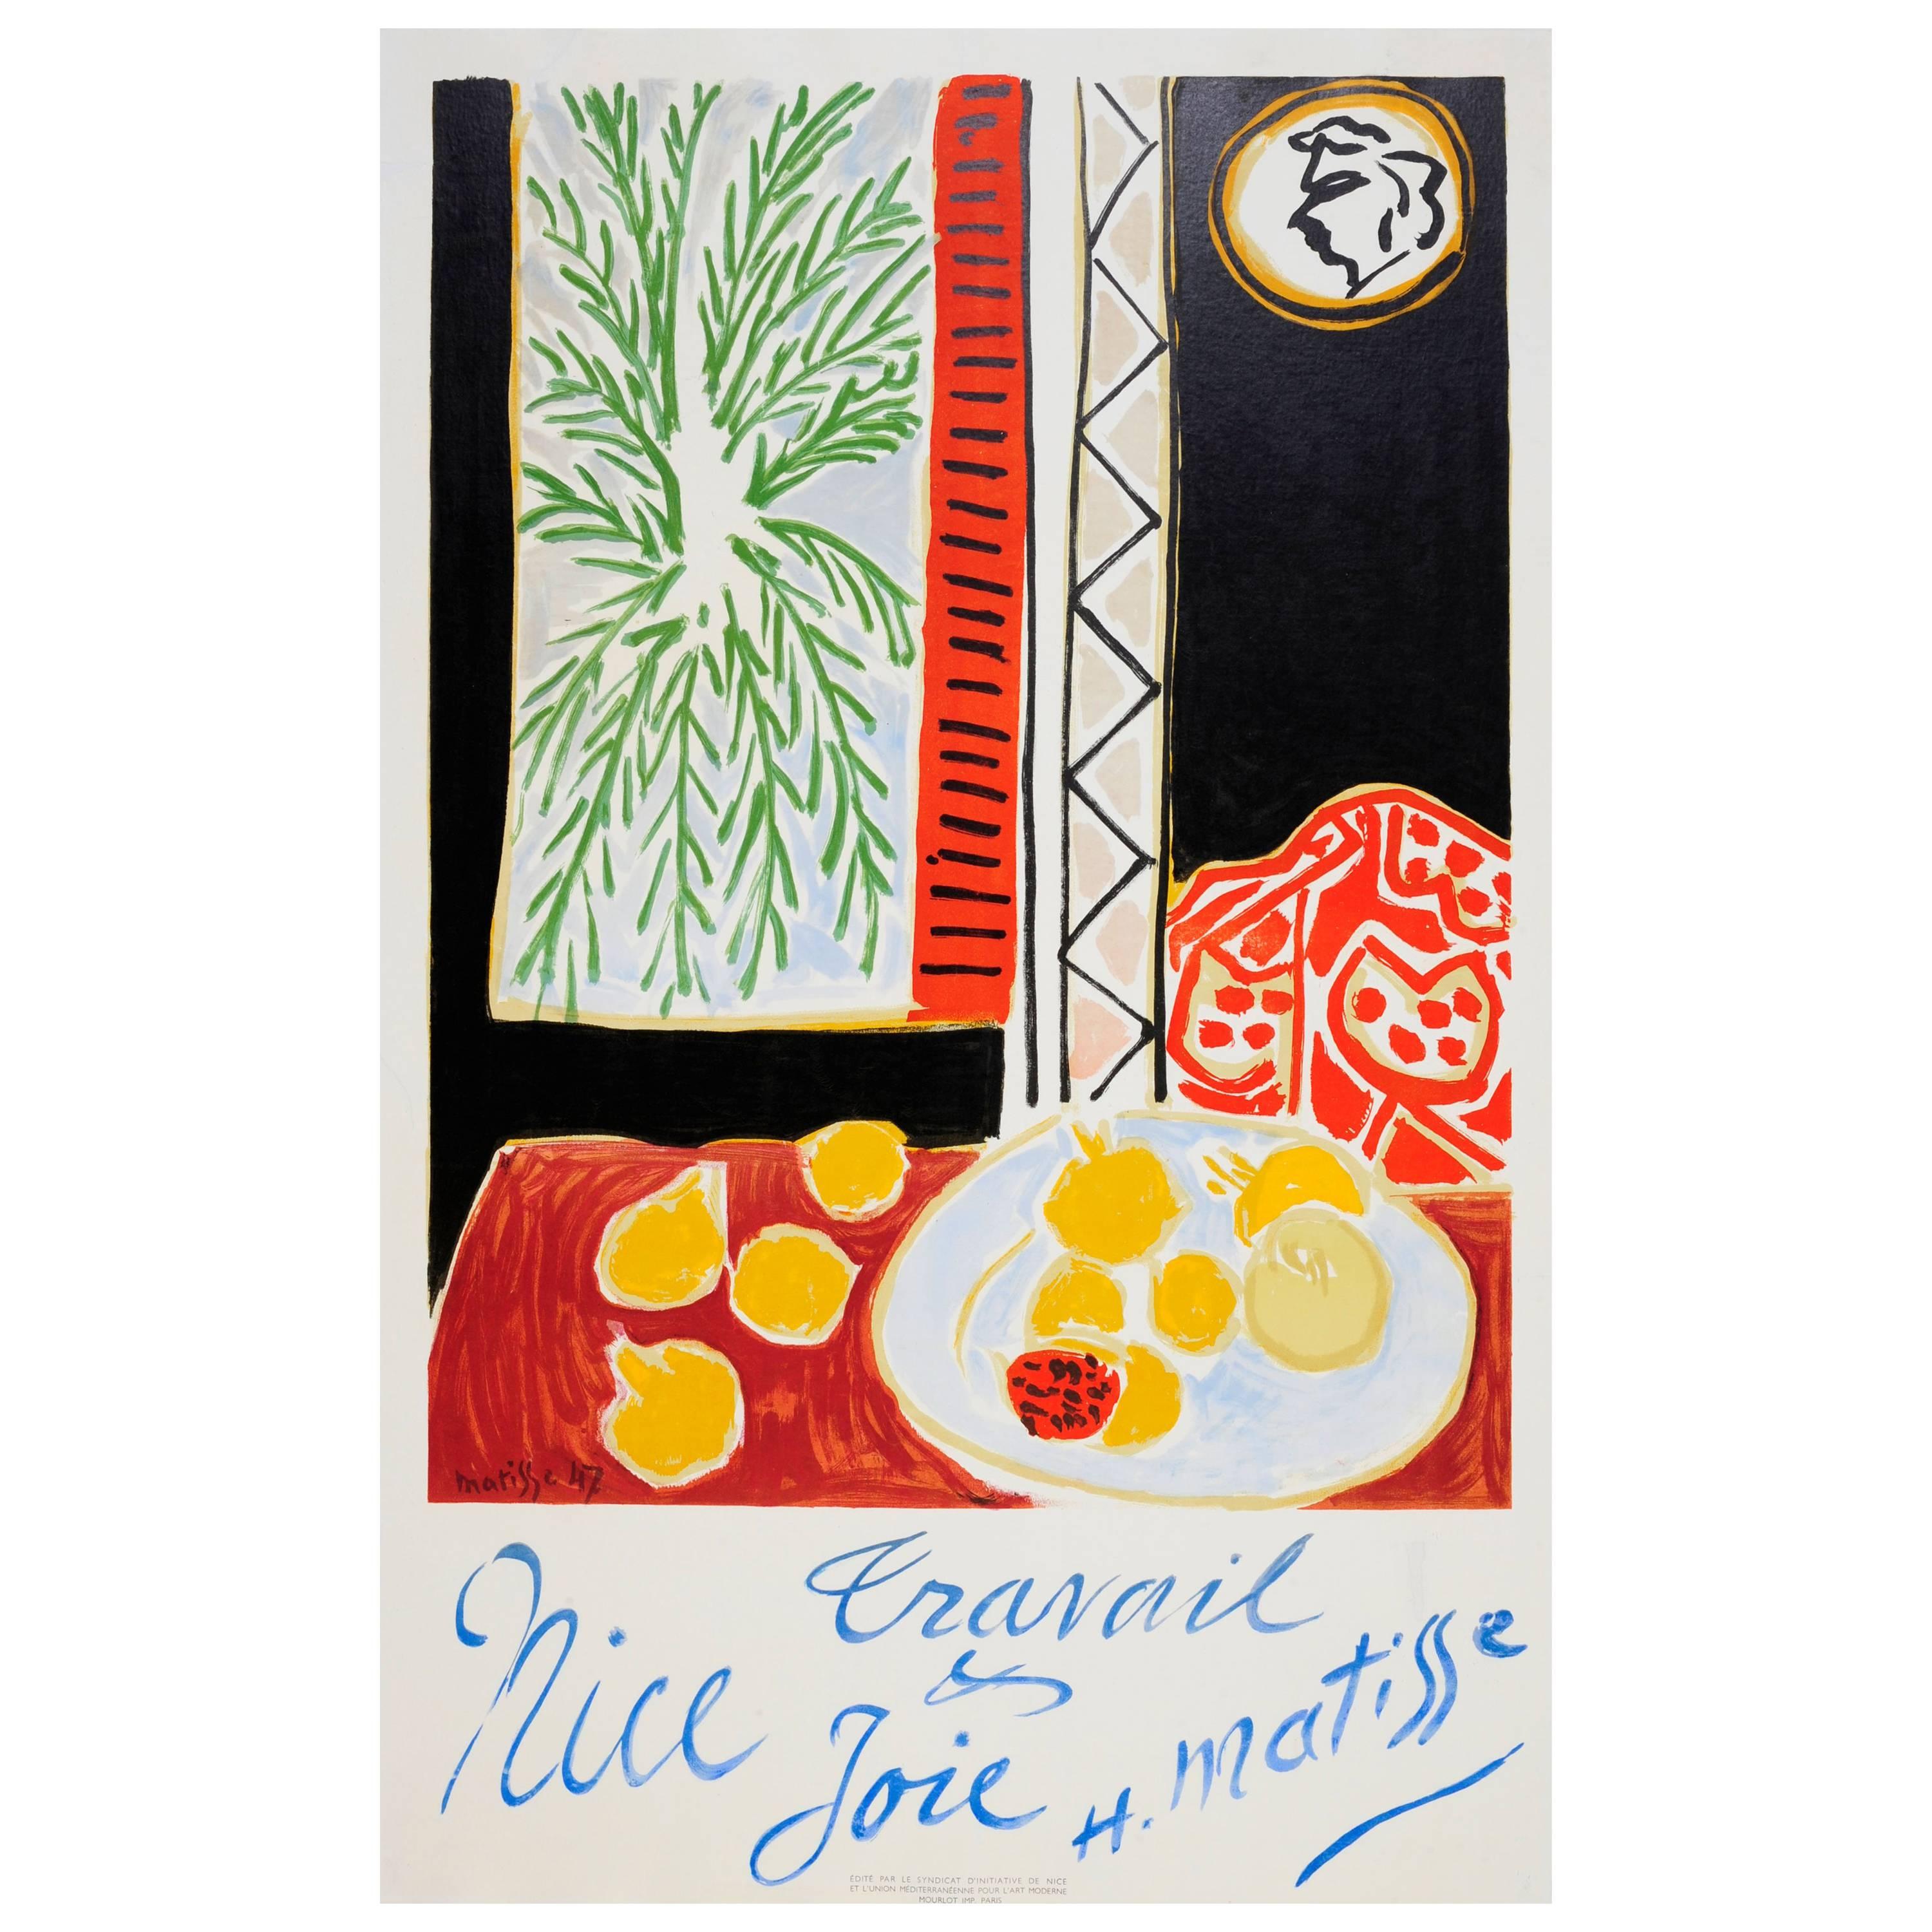 Original Vintage Travel Poster by Matisse for Nice France - Work and Happiness